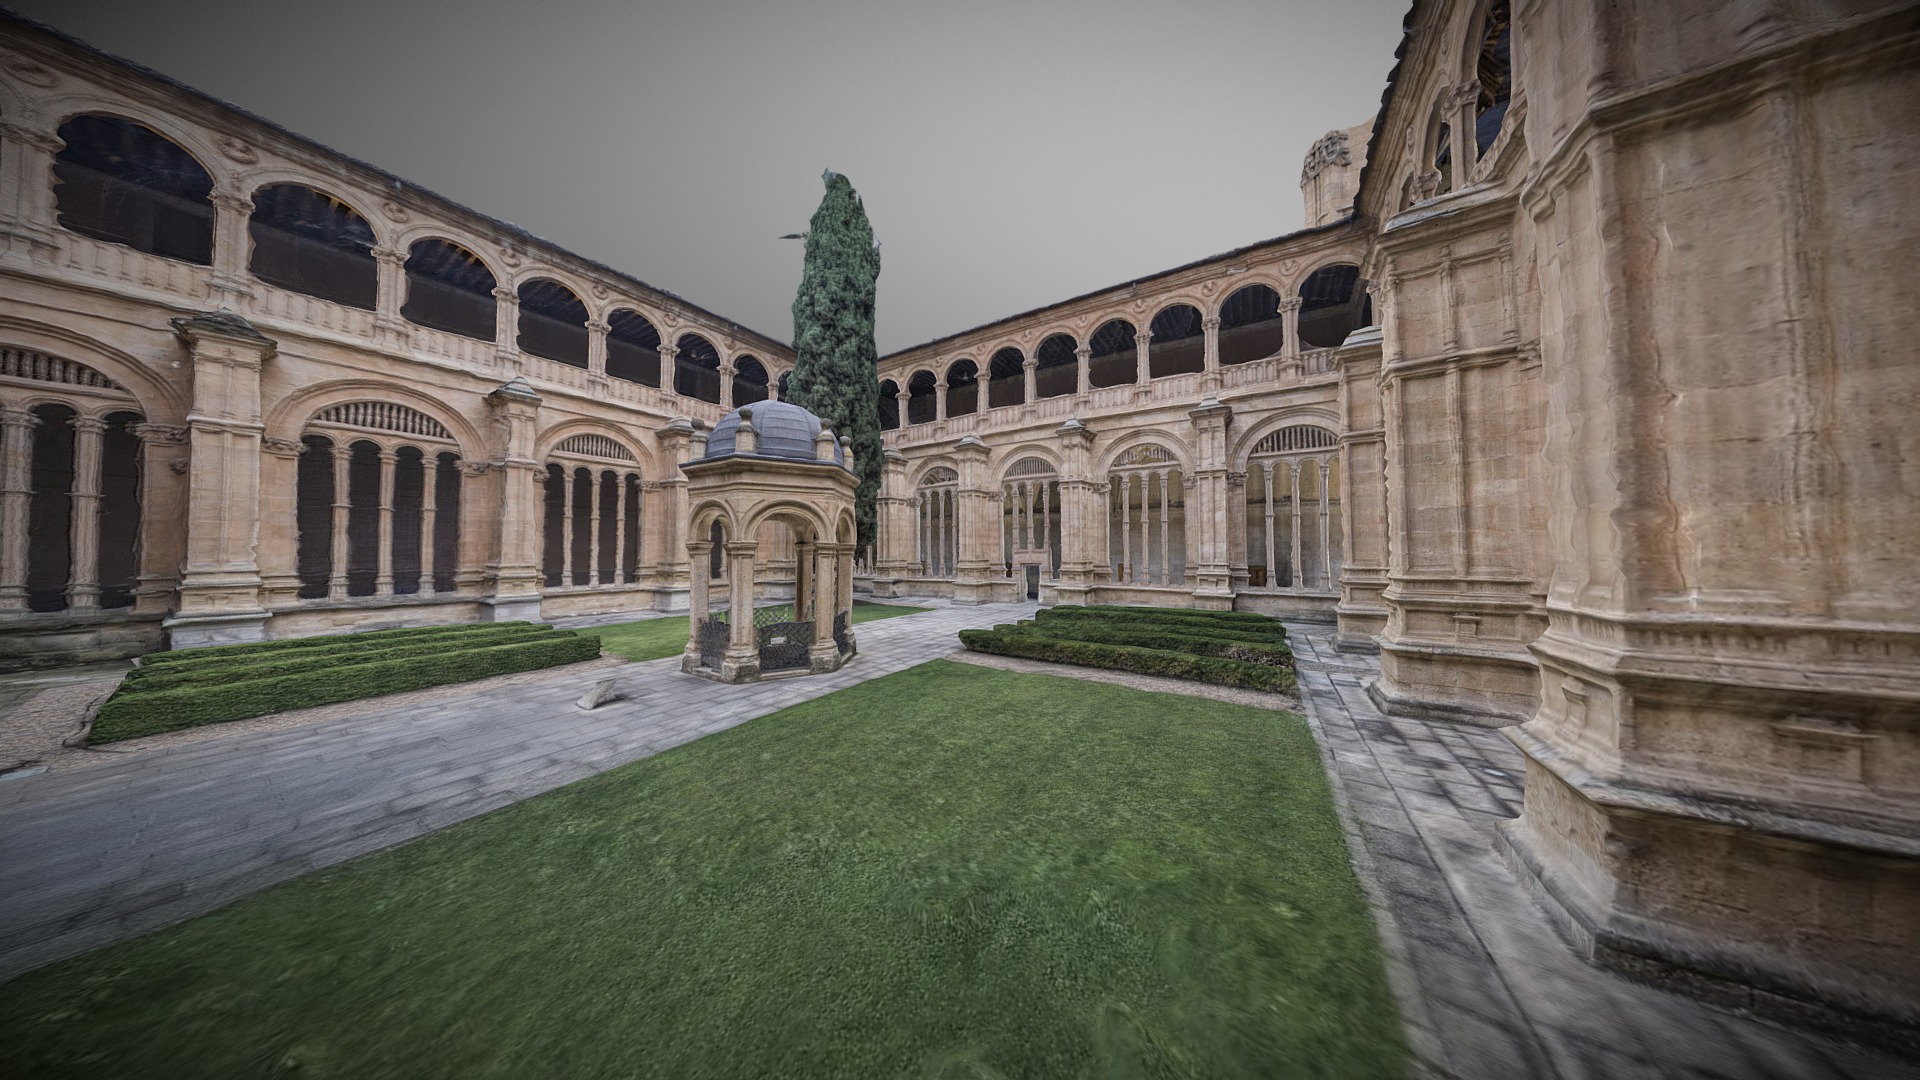 3D model Cloister of the Kings – photogrammetry scan - This is a 3D model of the Cloister of the Kings - photogrammetry scan. The 3D model is about a courtyard with a building in the background.